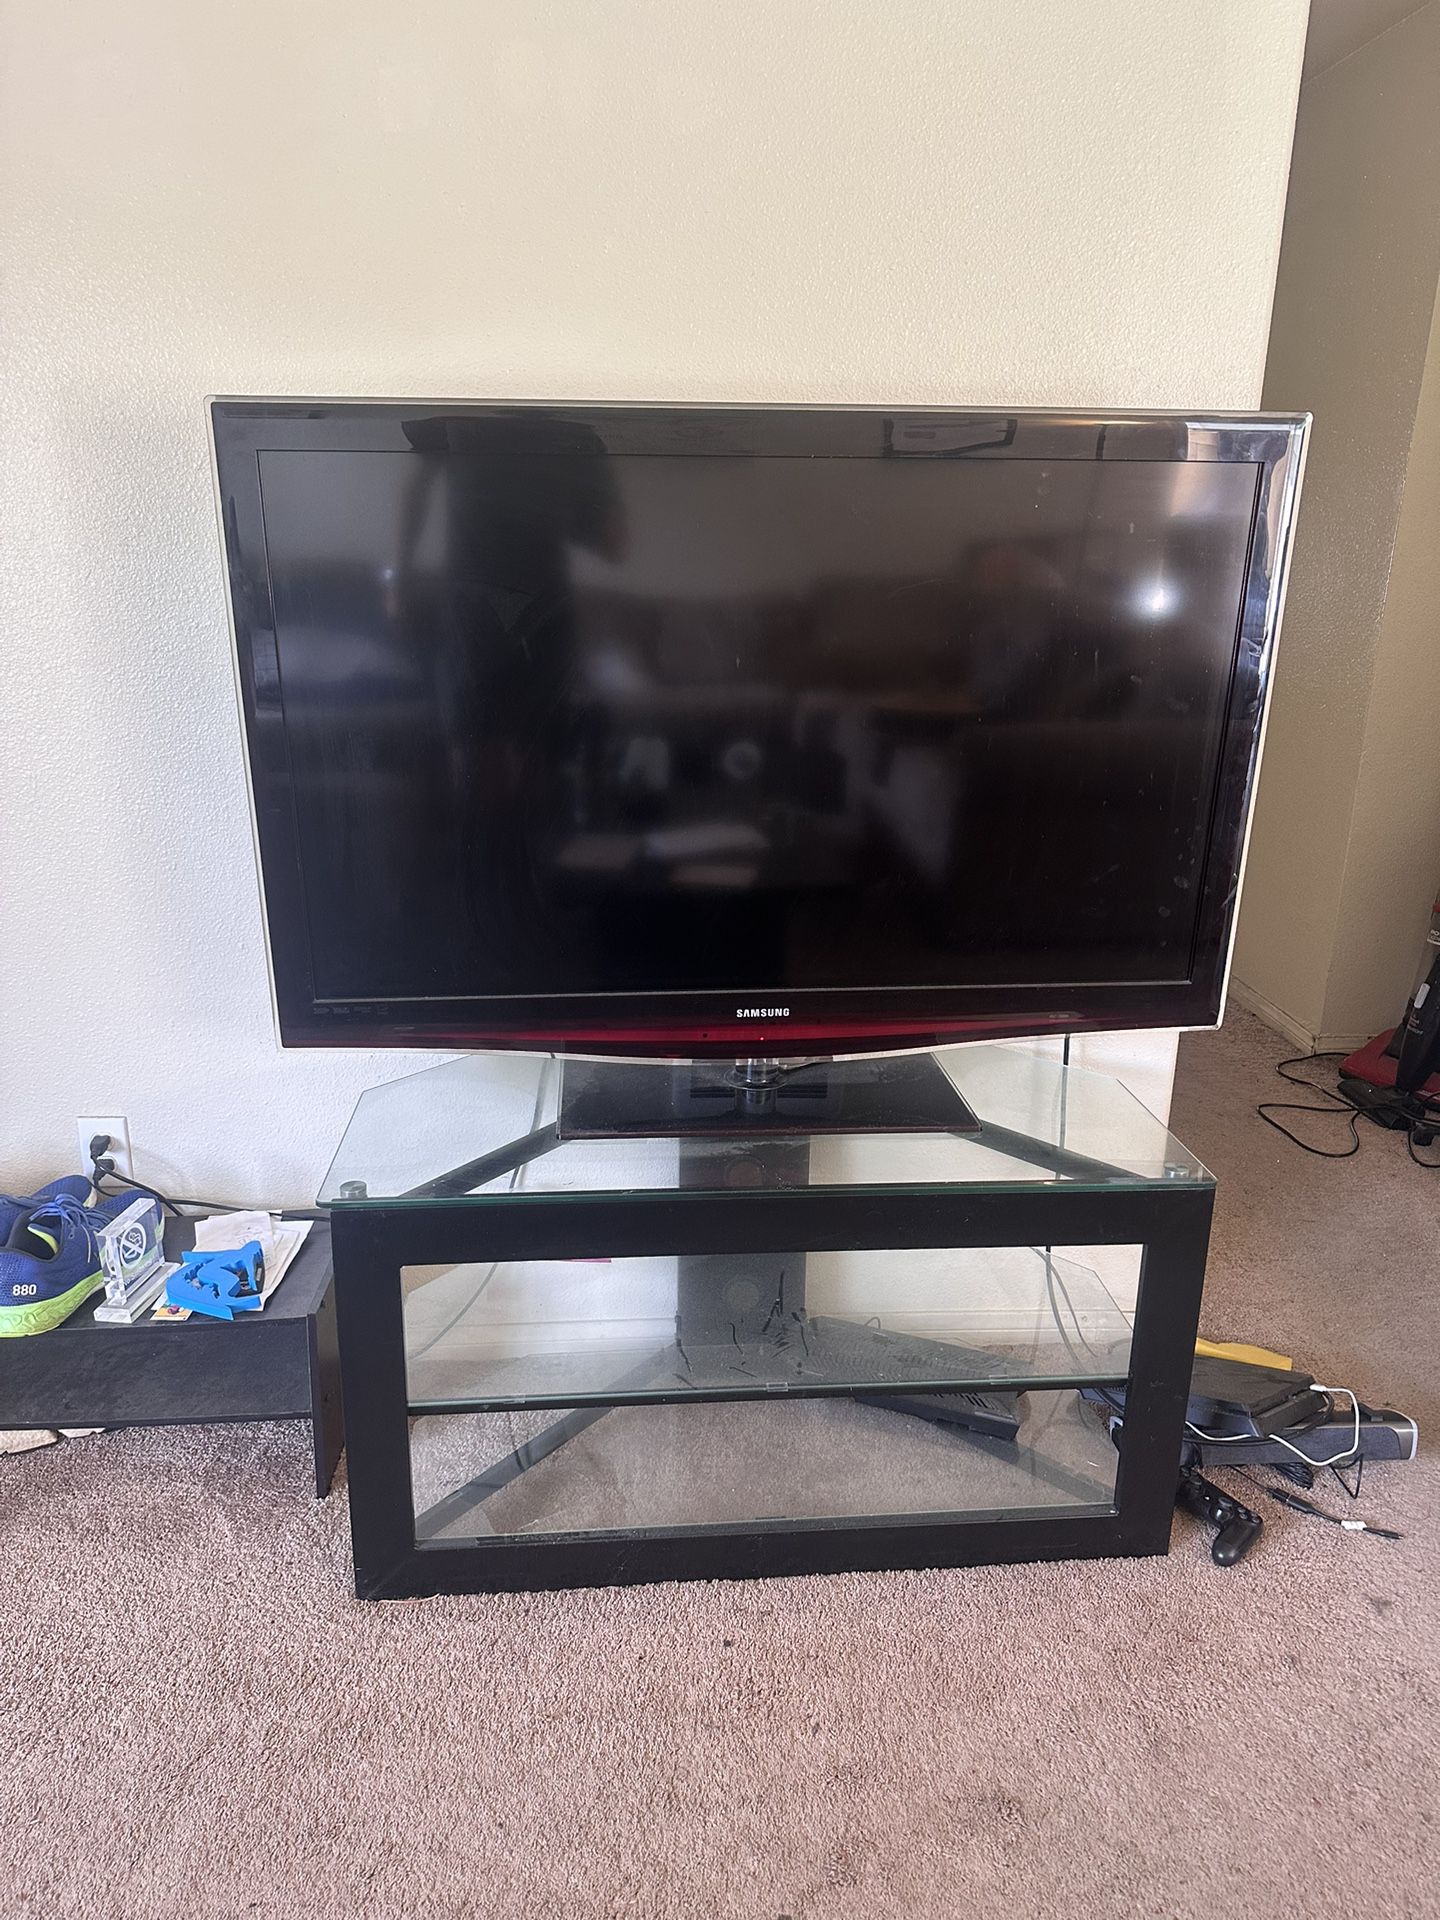 Samsung 52” TV with stand